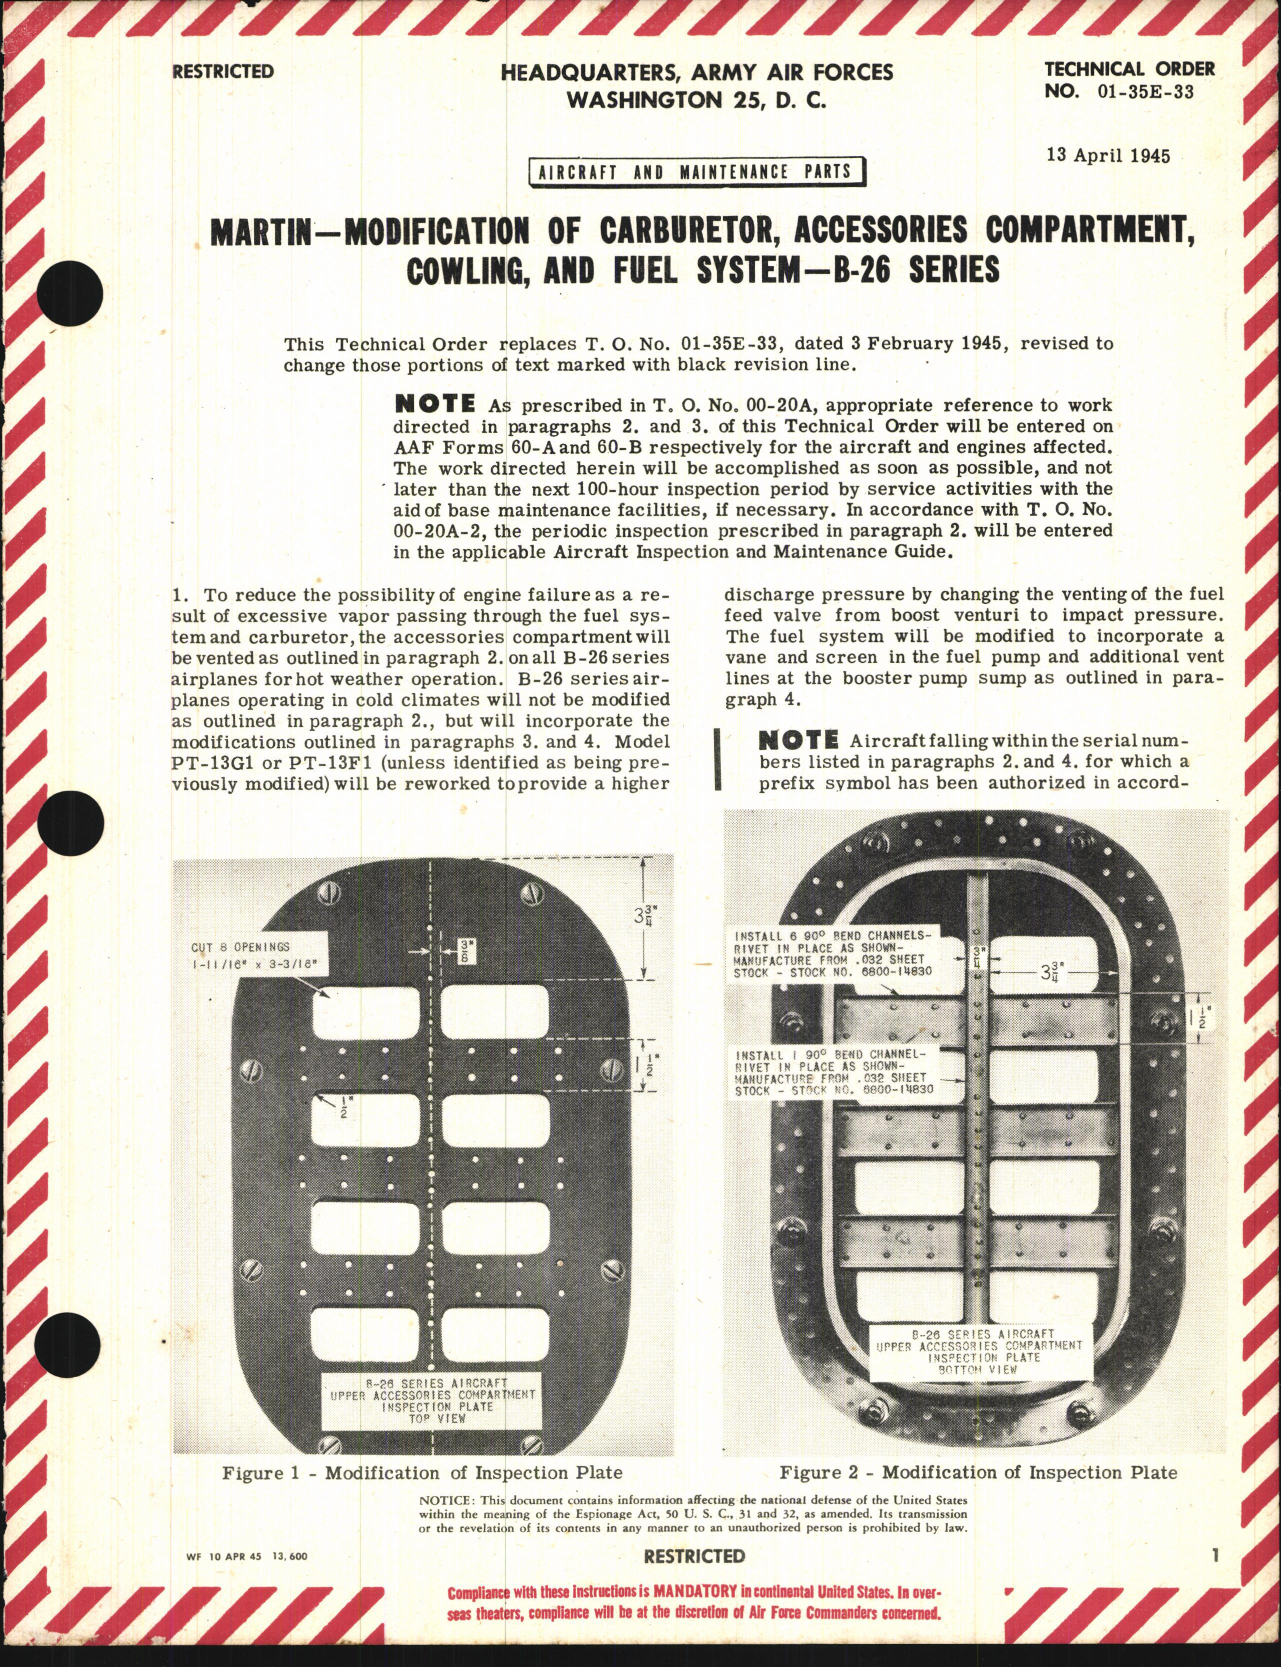 Sample page 1 from AirCorps Library document: Modification of Carburetor, Accessories Compartment. Cowling, and Fuel System for B-26 Series